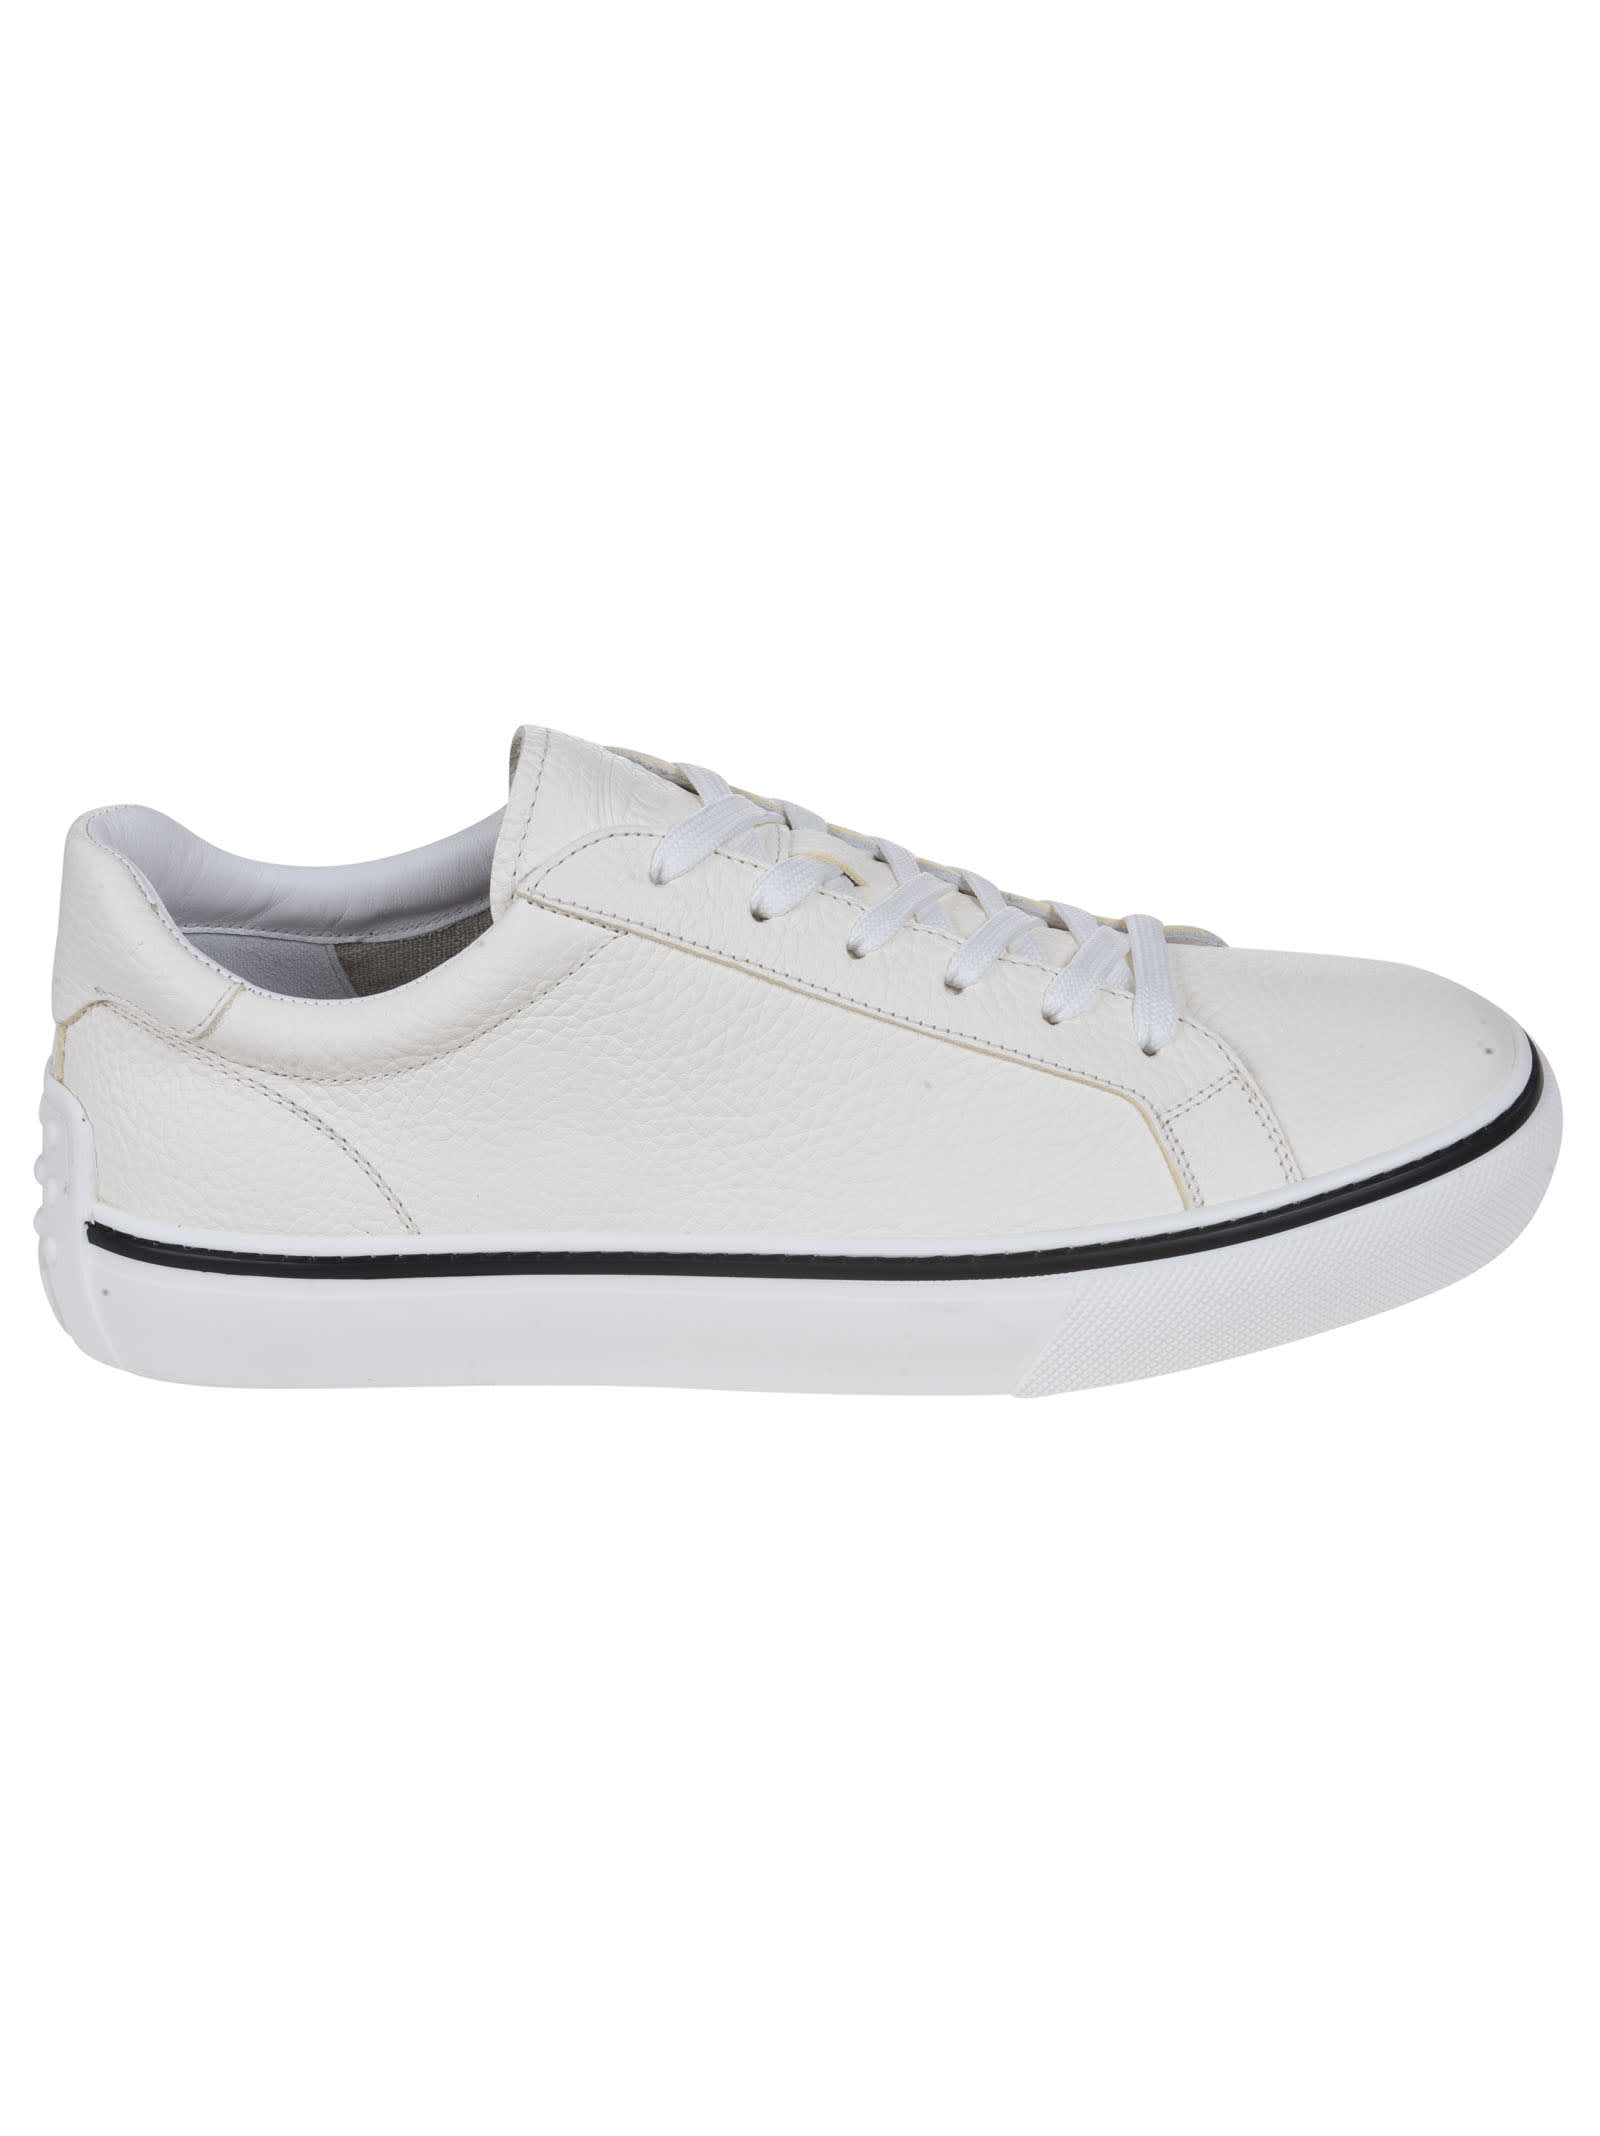 Tods Plain Sneakers